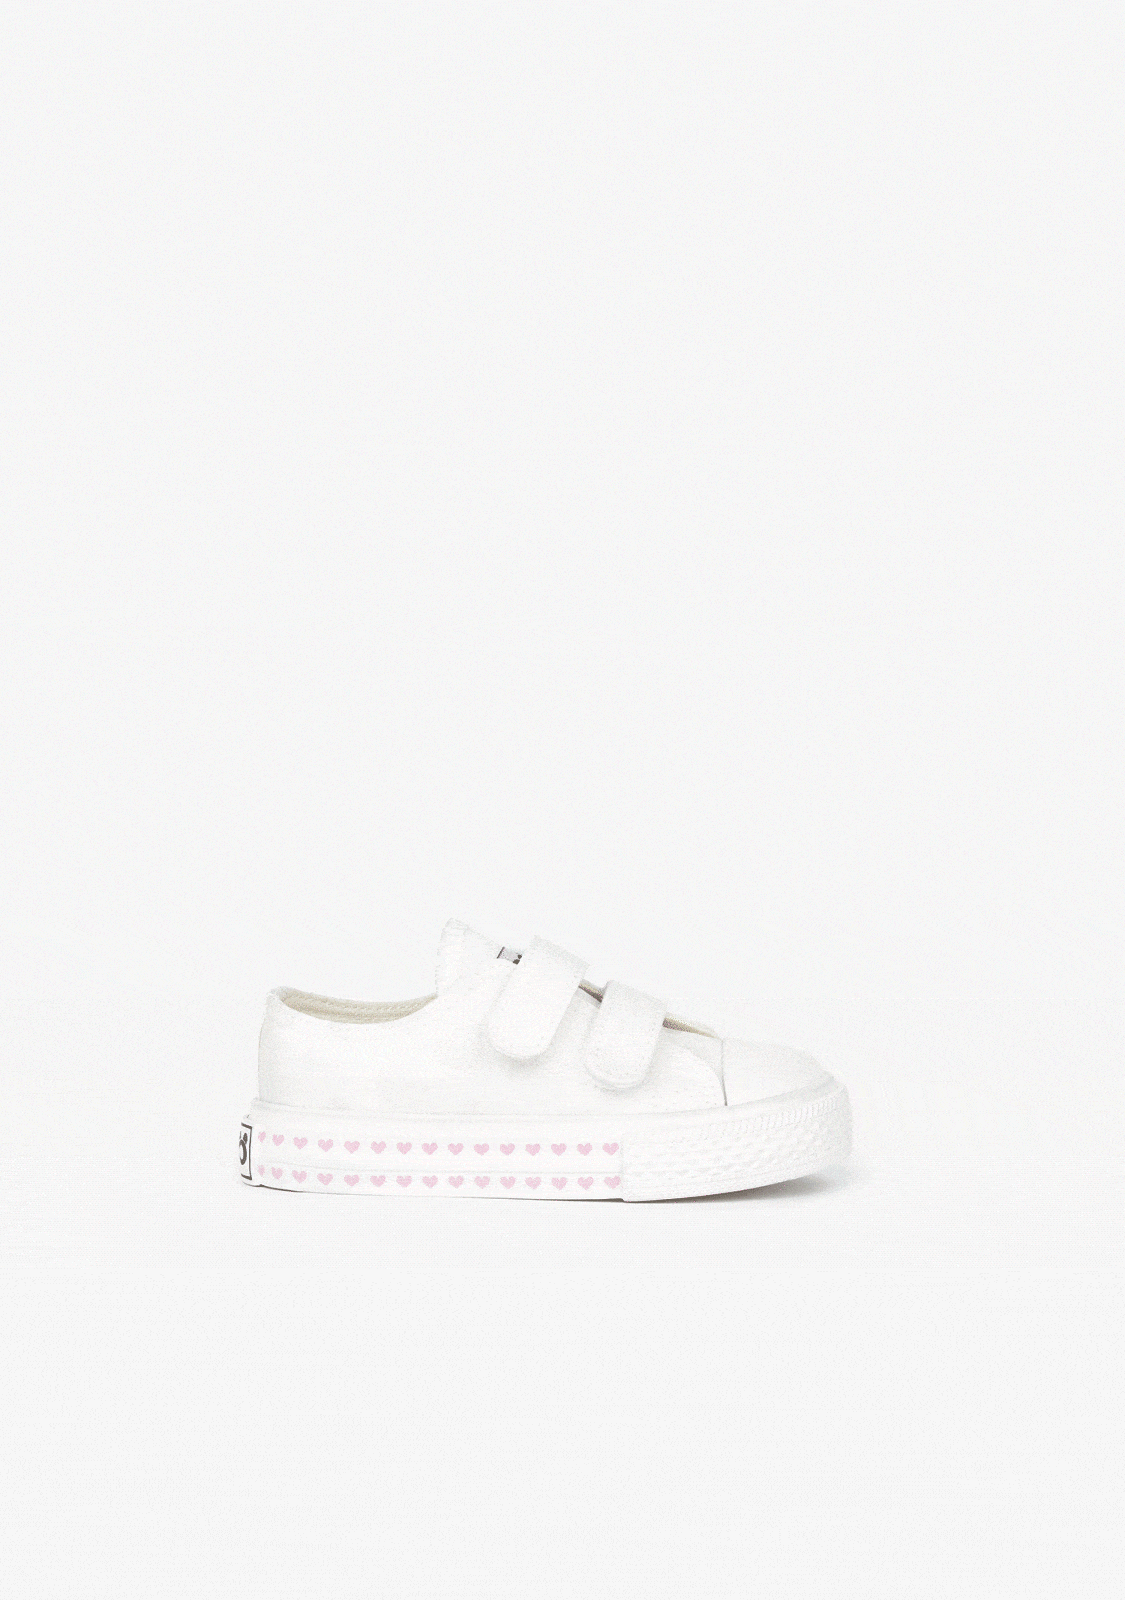 OSITO Shoes Baby's White Sunlight Sneakers